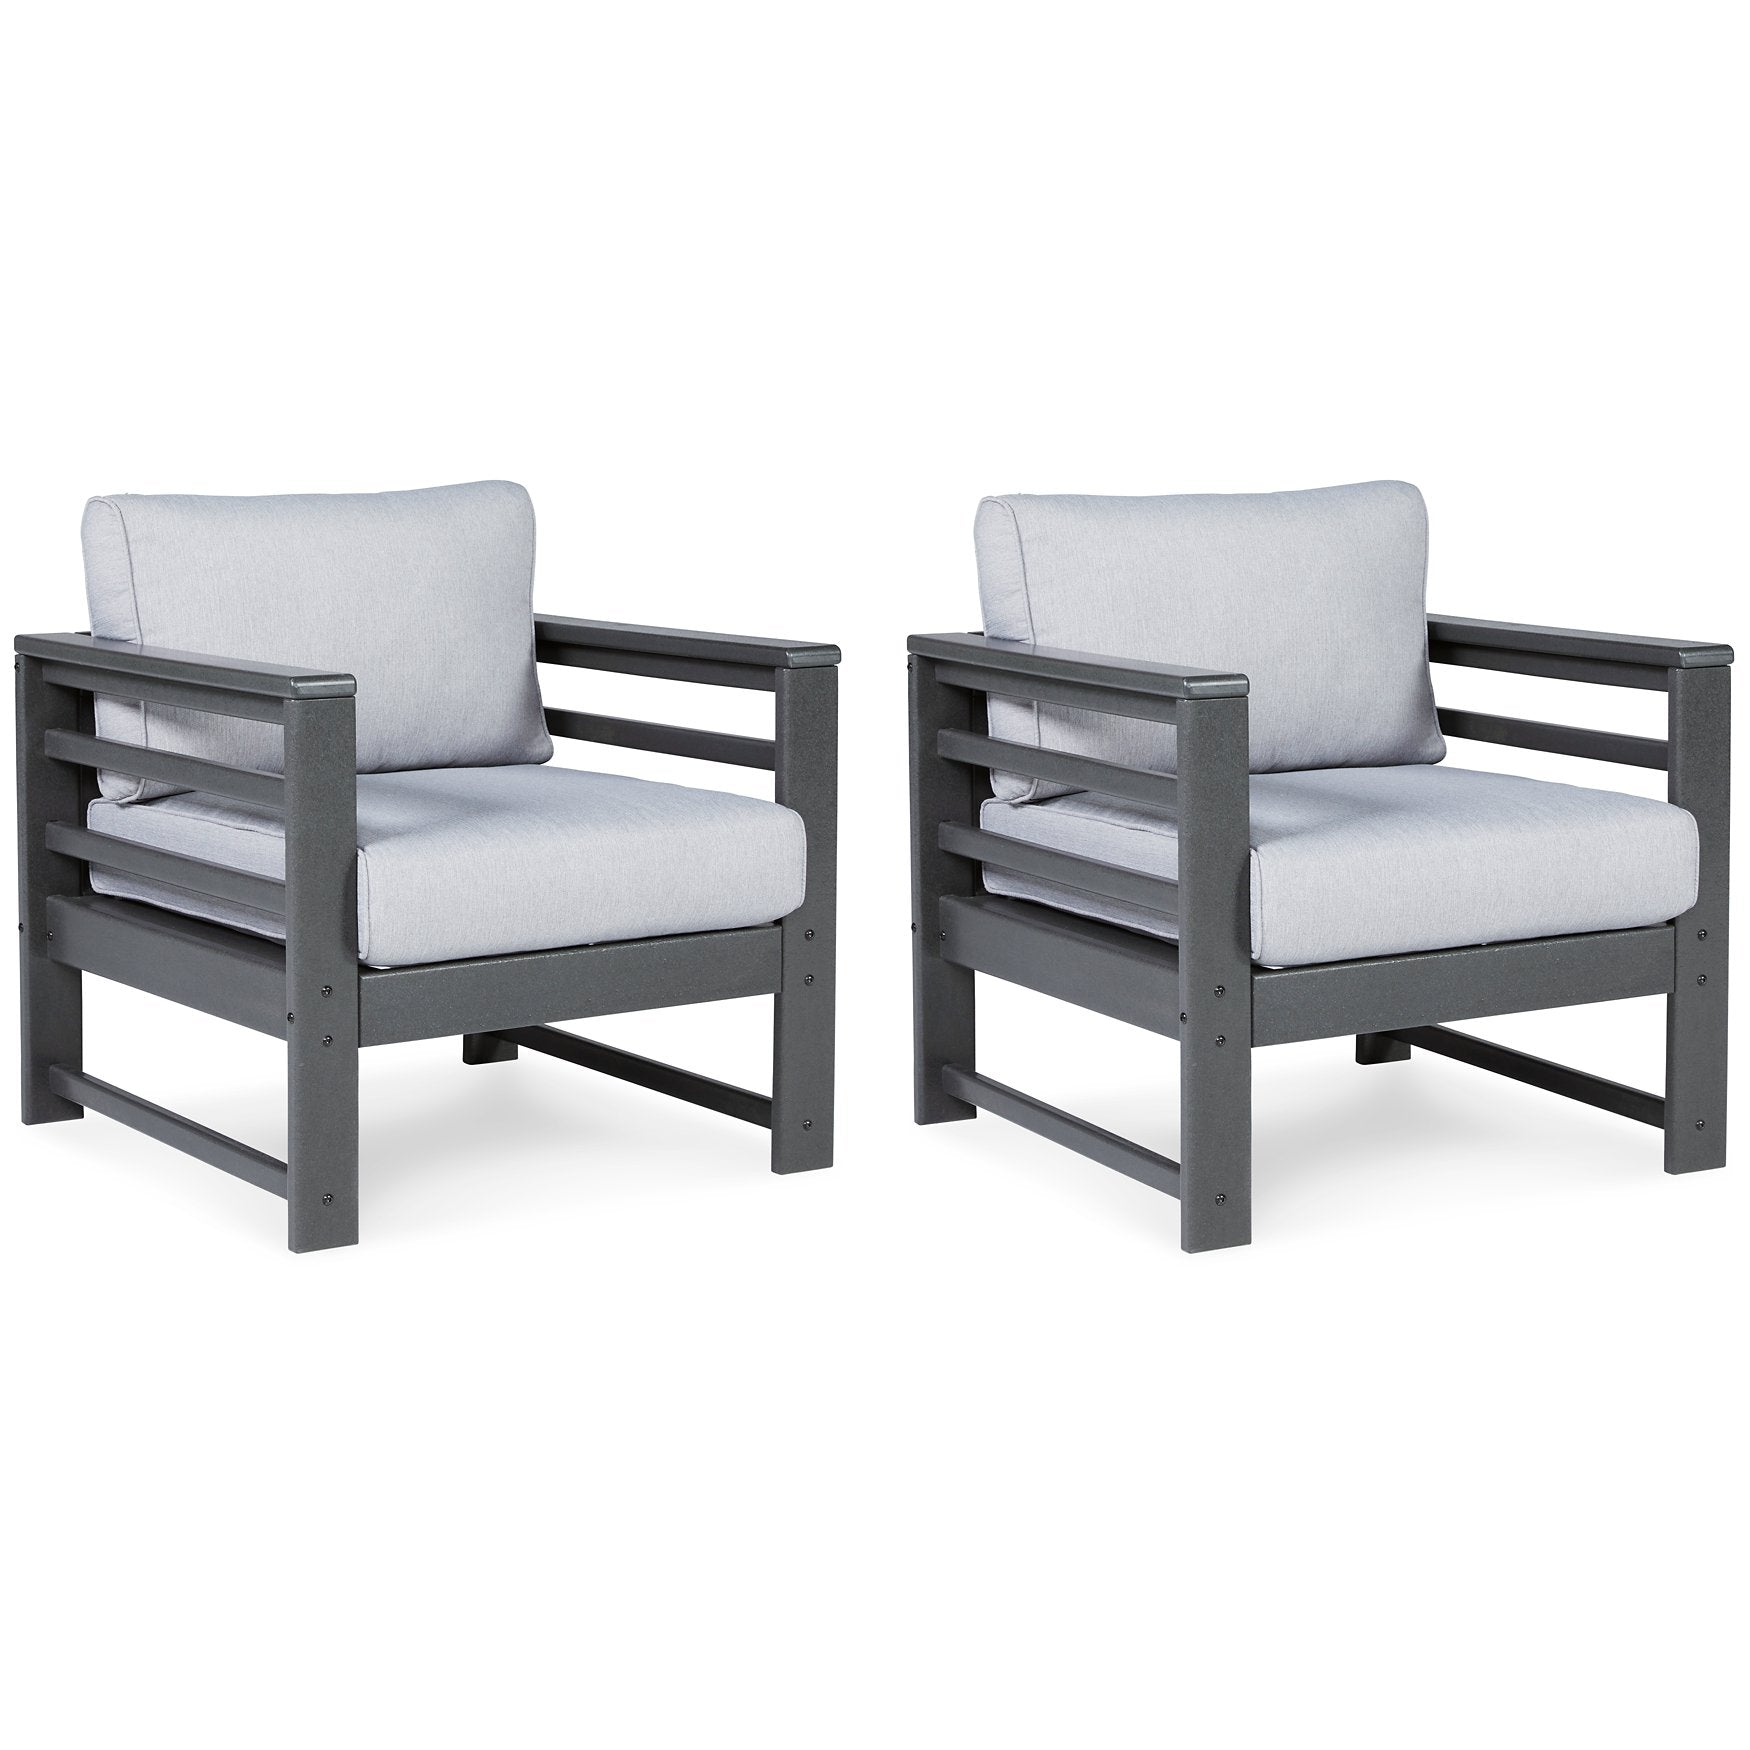 Amora Outdoor Lounge Chair with Cushion (Set of 2) Amora Outdoor Lounge Chair with Cushion (Set of 2) Half Price Furniture